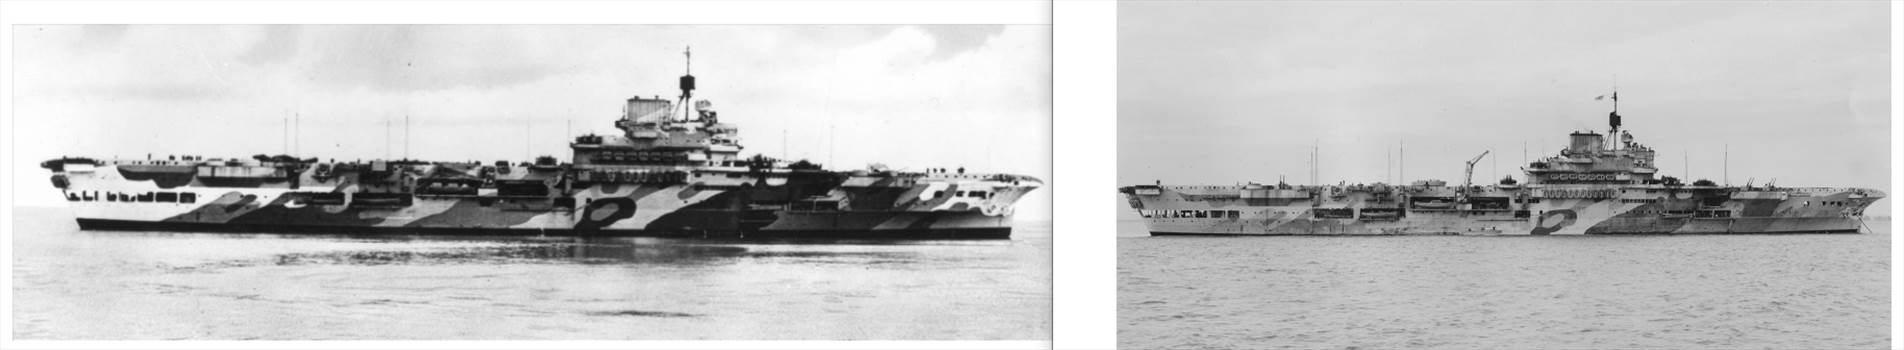 Starboard Comparison.png by jamieduff1981